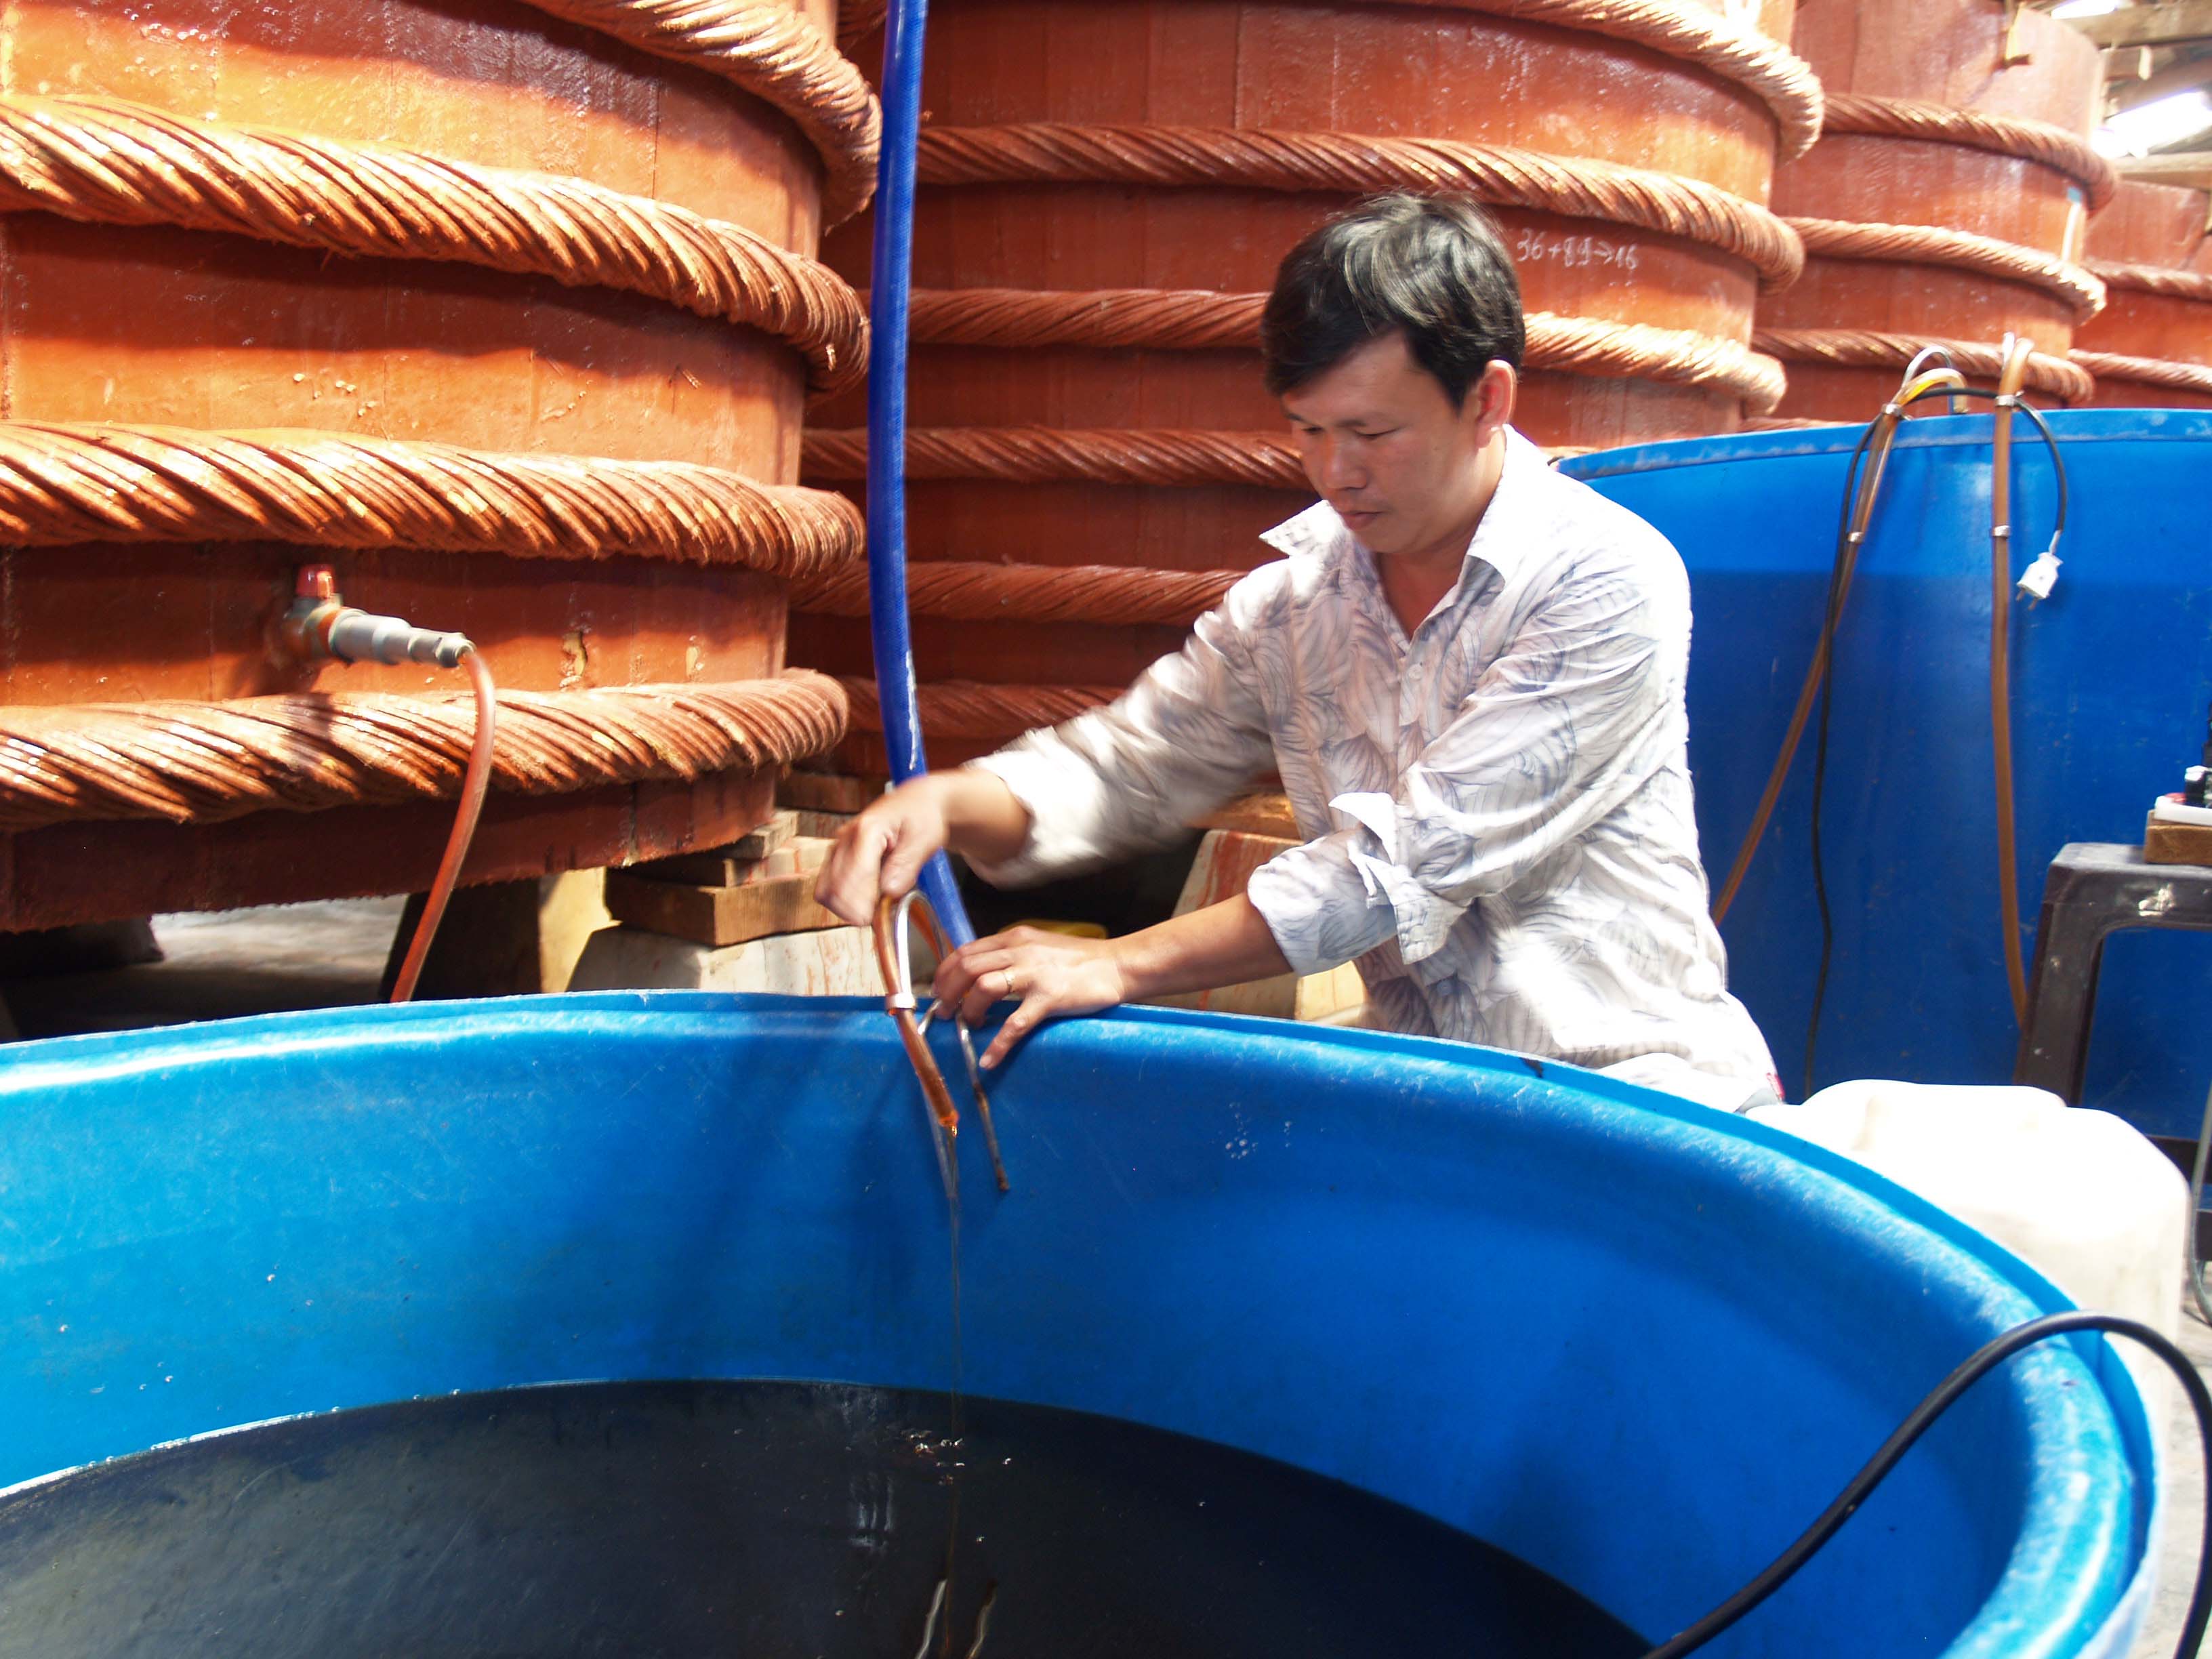 The traditional way of making the famous Phu Quoc fish sauce